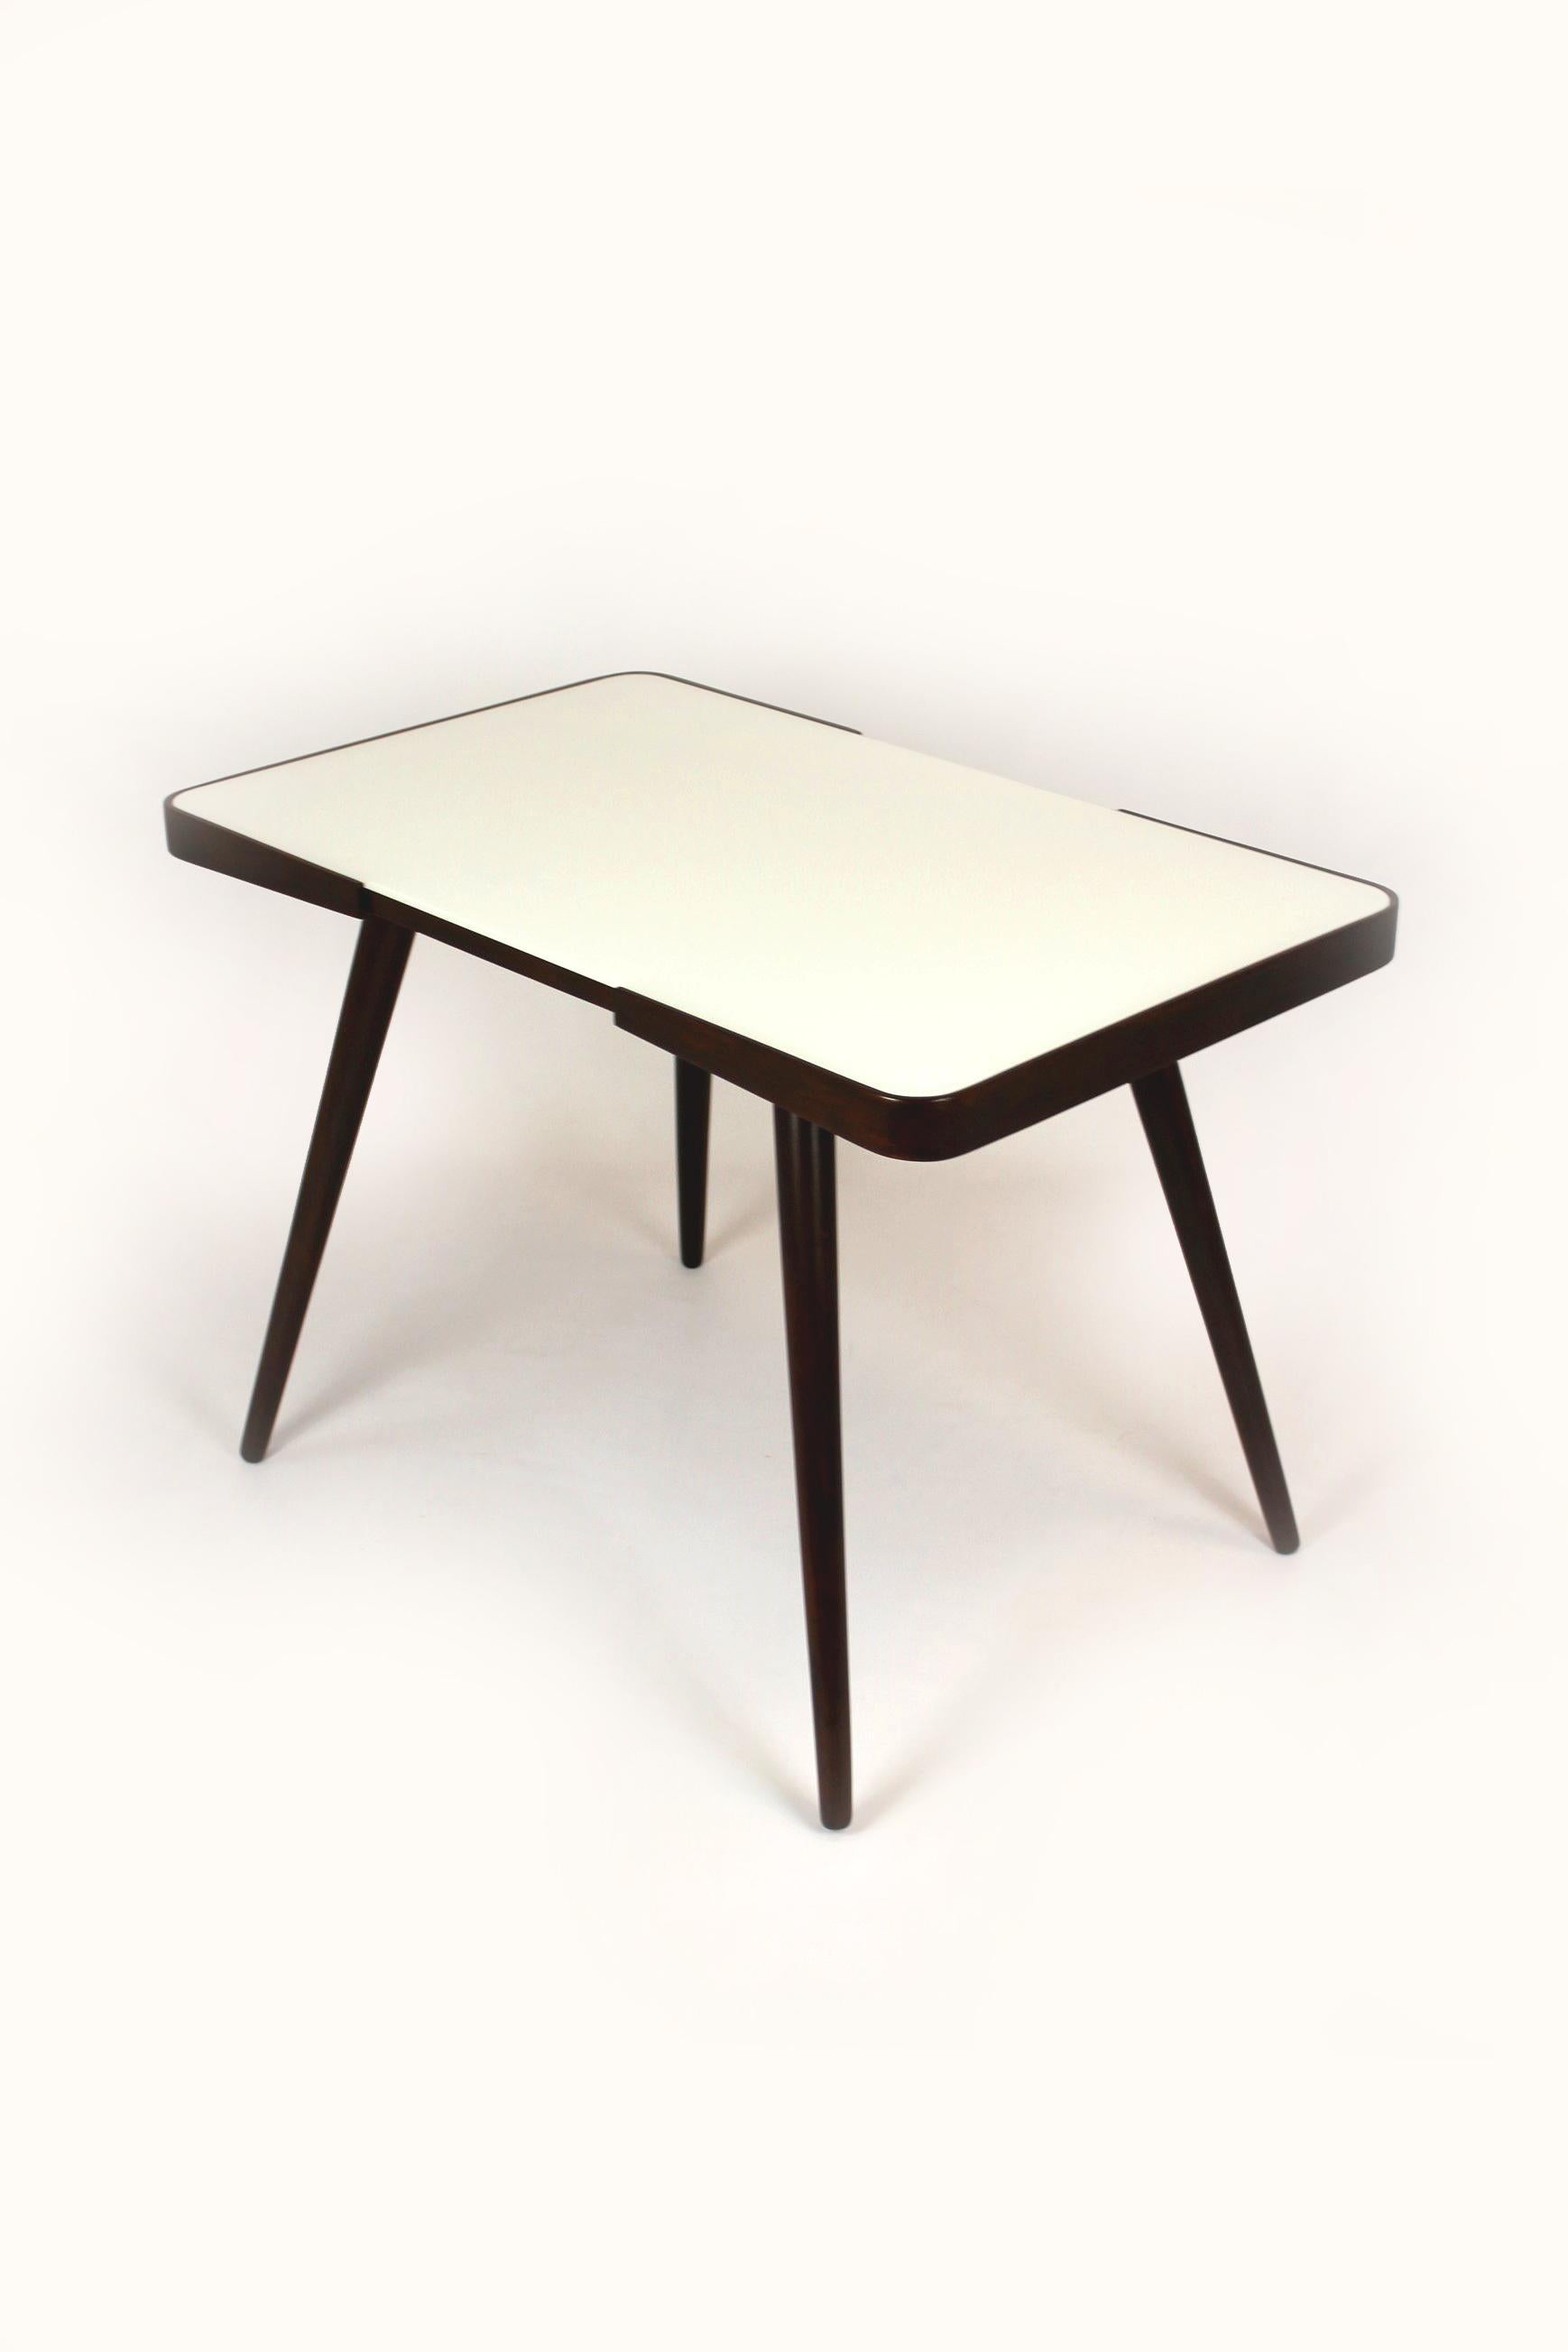 Mid-Century Modern Restored Coffee Table with White Glass Top by J. Jiroutek for Int. Praha, 1960s For Sale